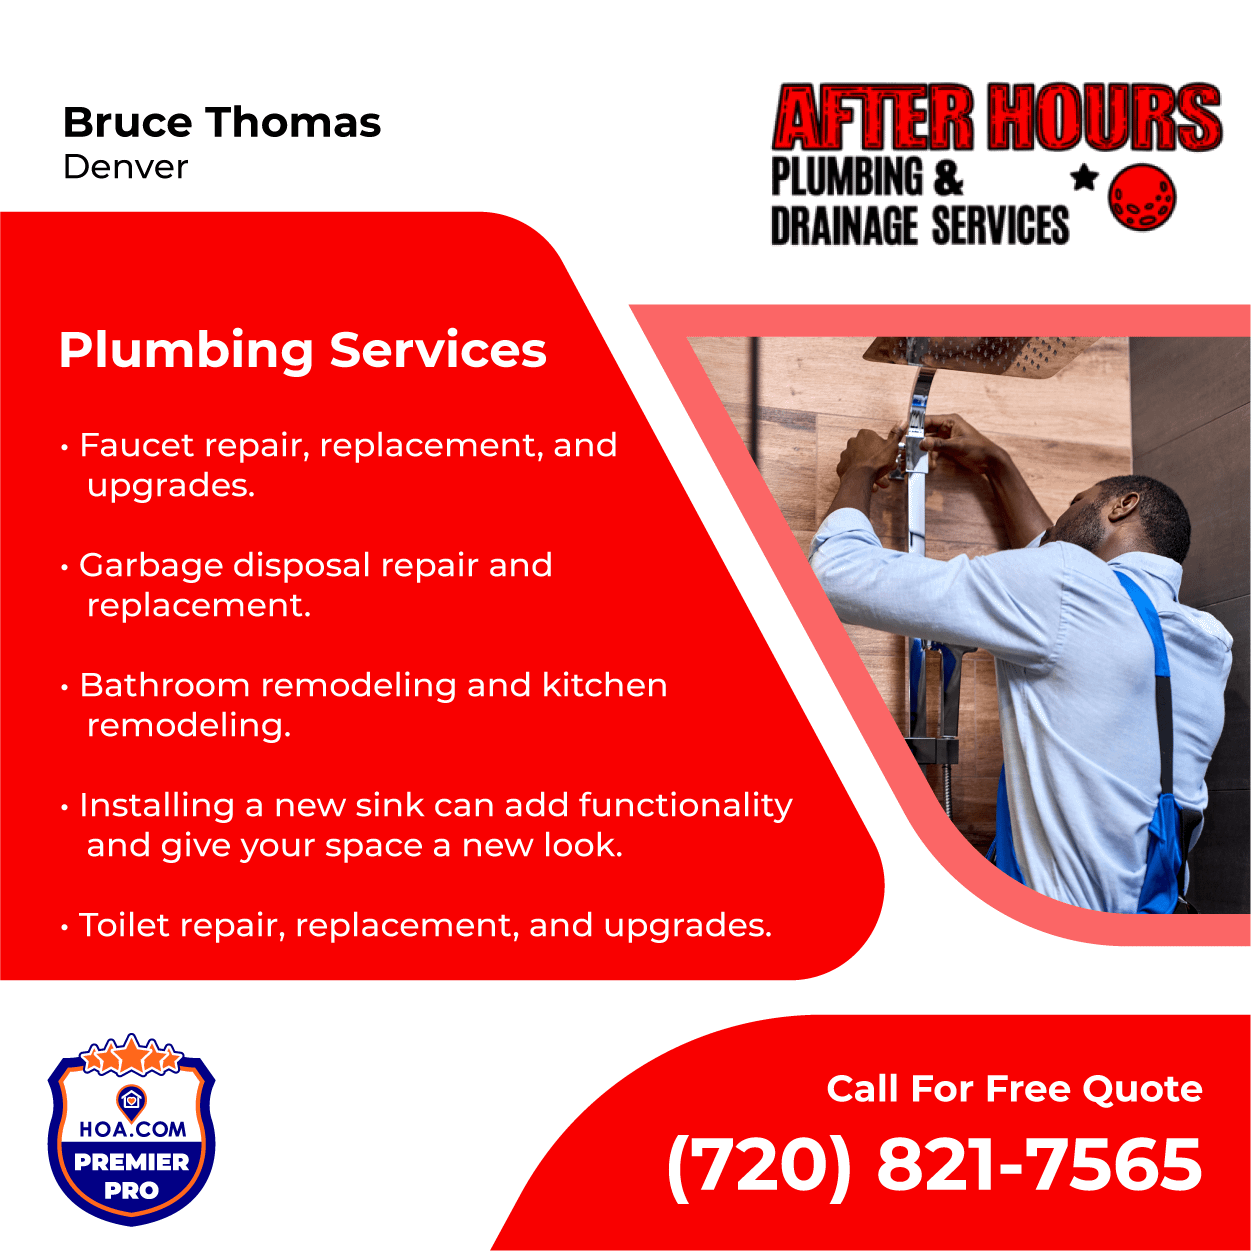 After Hours Plumbing & Drainage Services